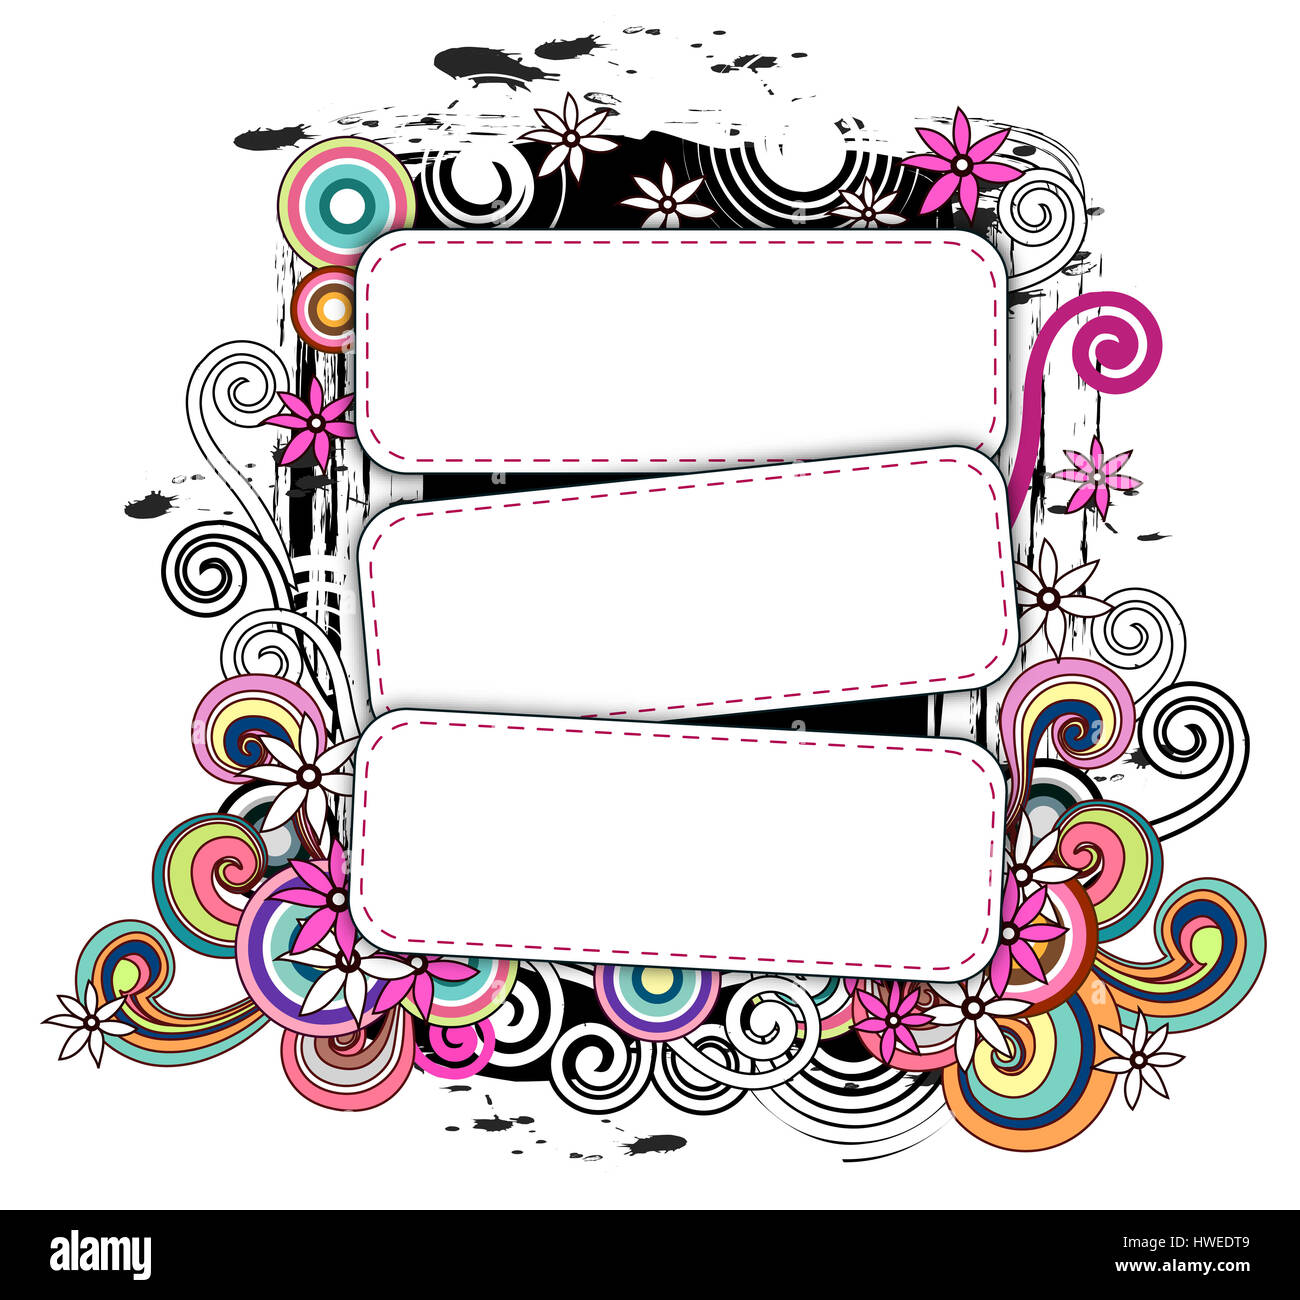 Art Unique with Border Design Frame Beautiful, Drawing of Simple Wreath, in  Black and White Colors. Vector Stock Vector - Illustration of elegant,  decor: 154740259